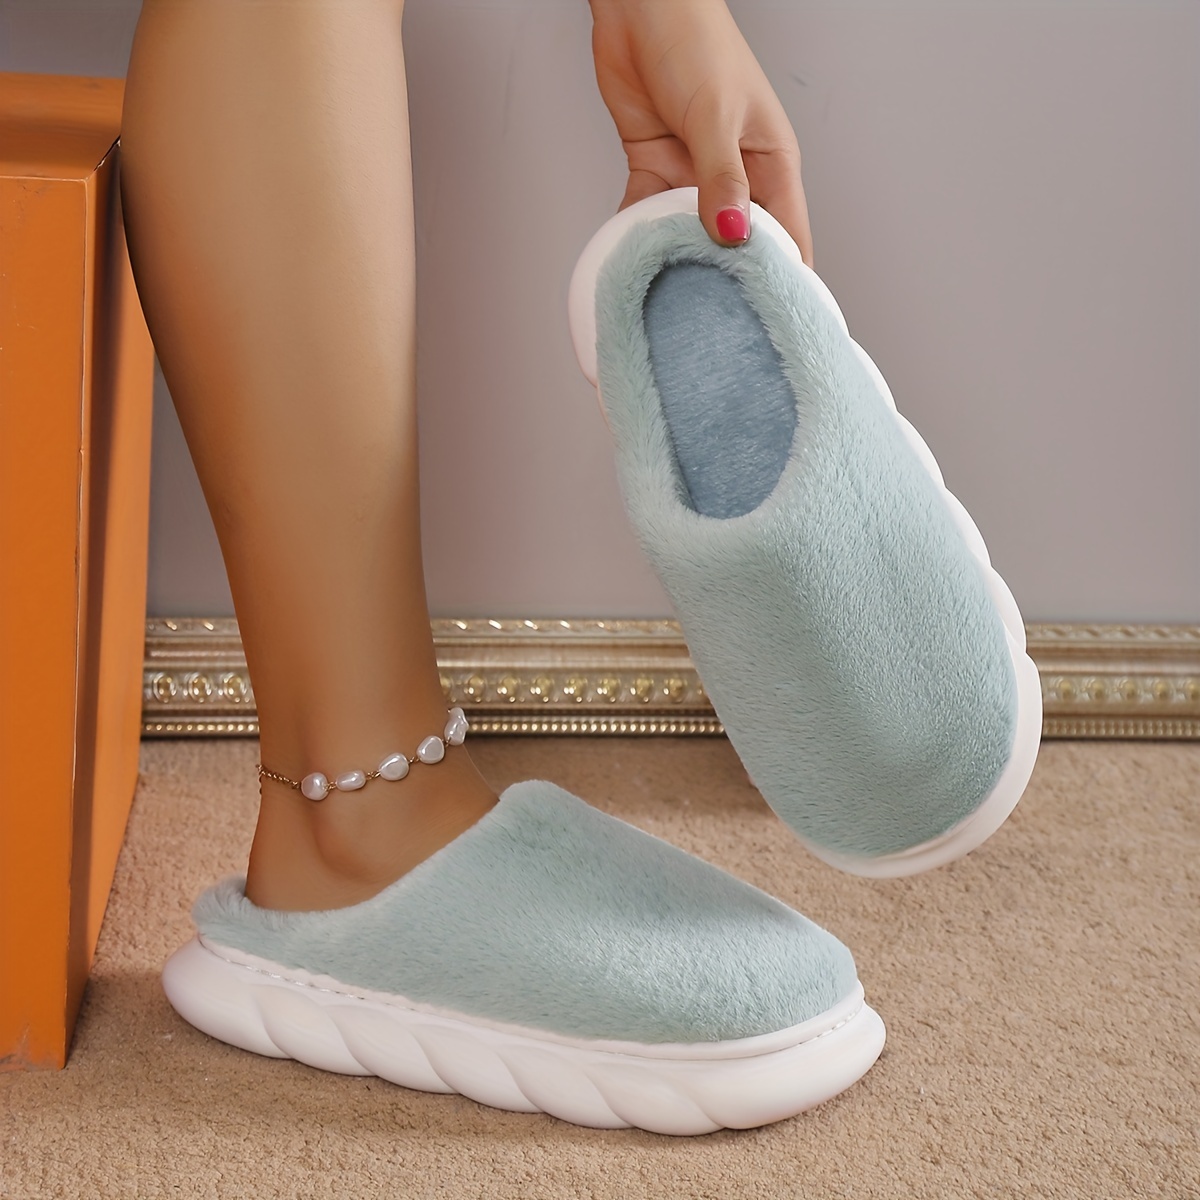 simple platform slippers casual slip plush lined shoes